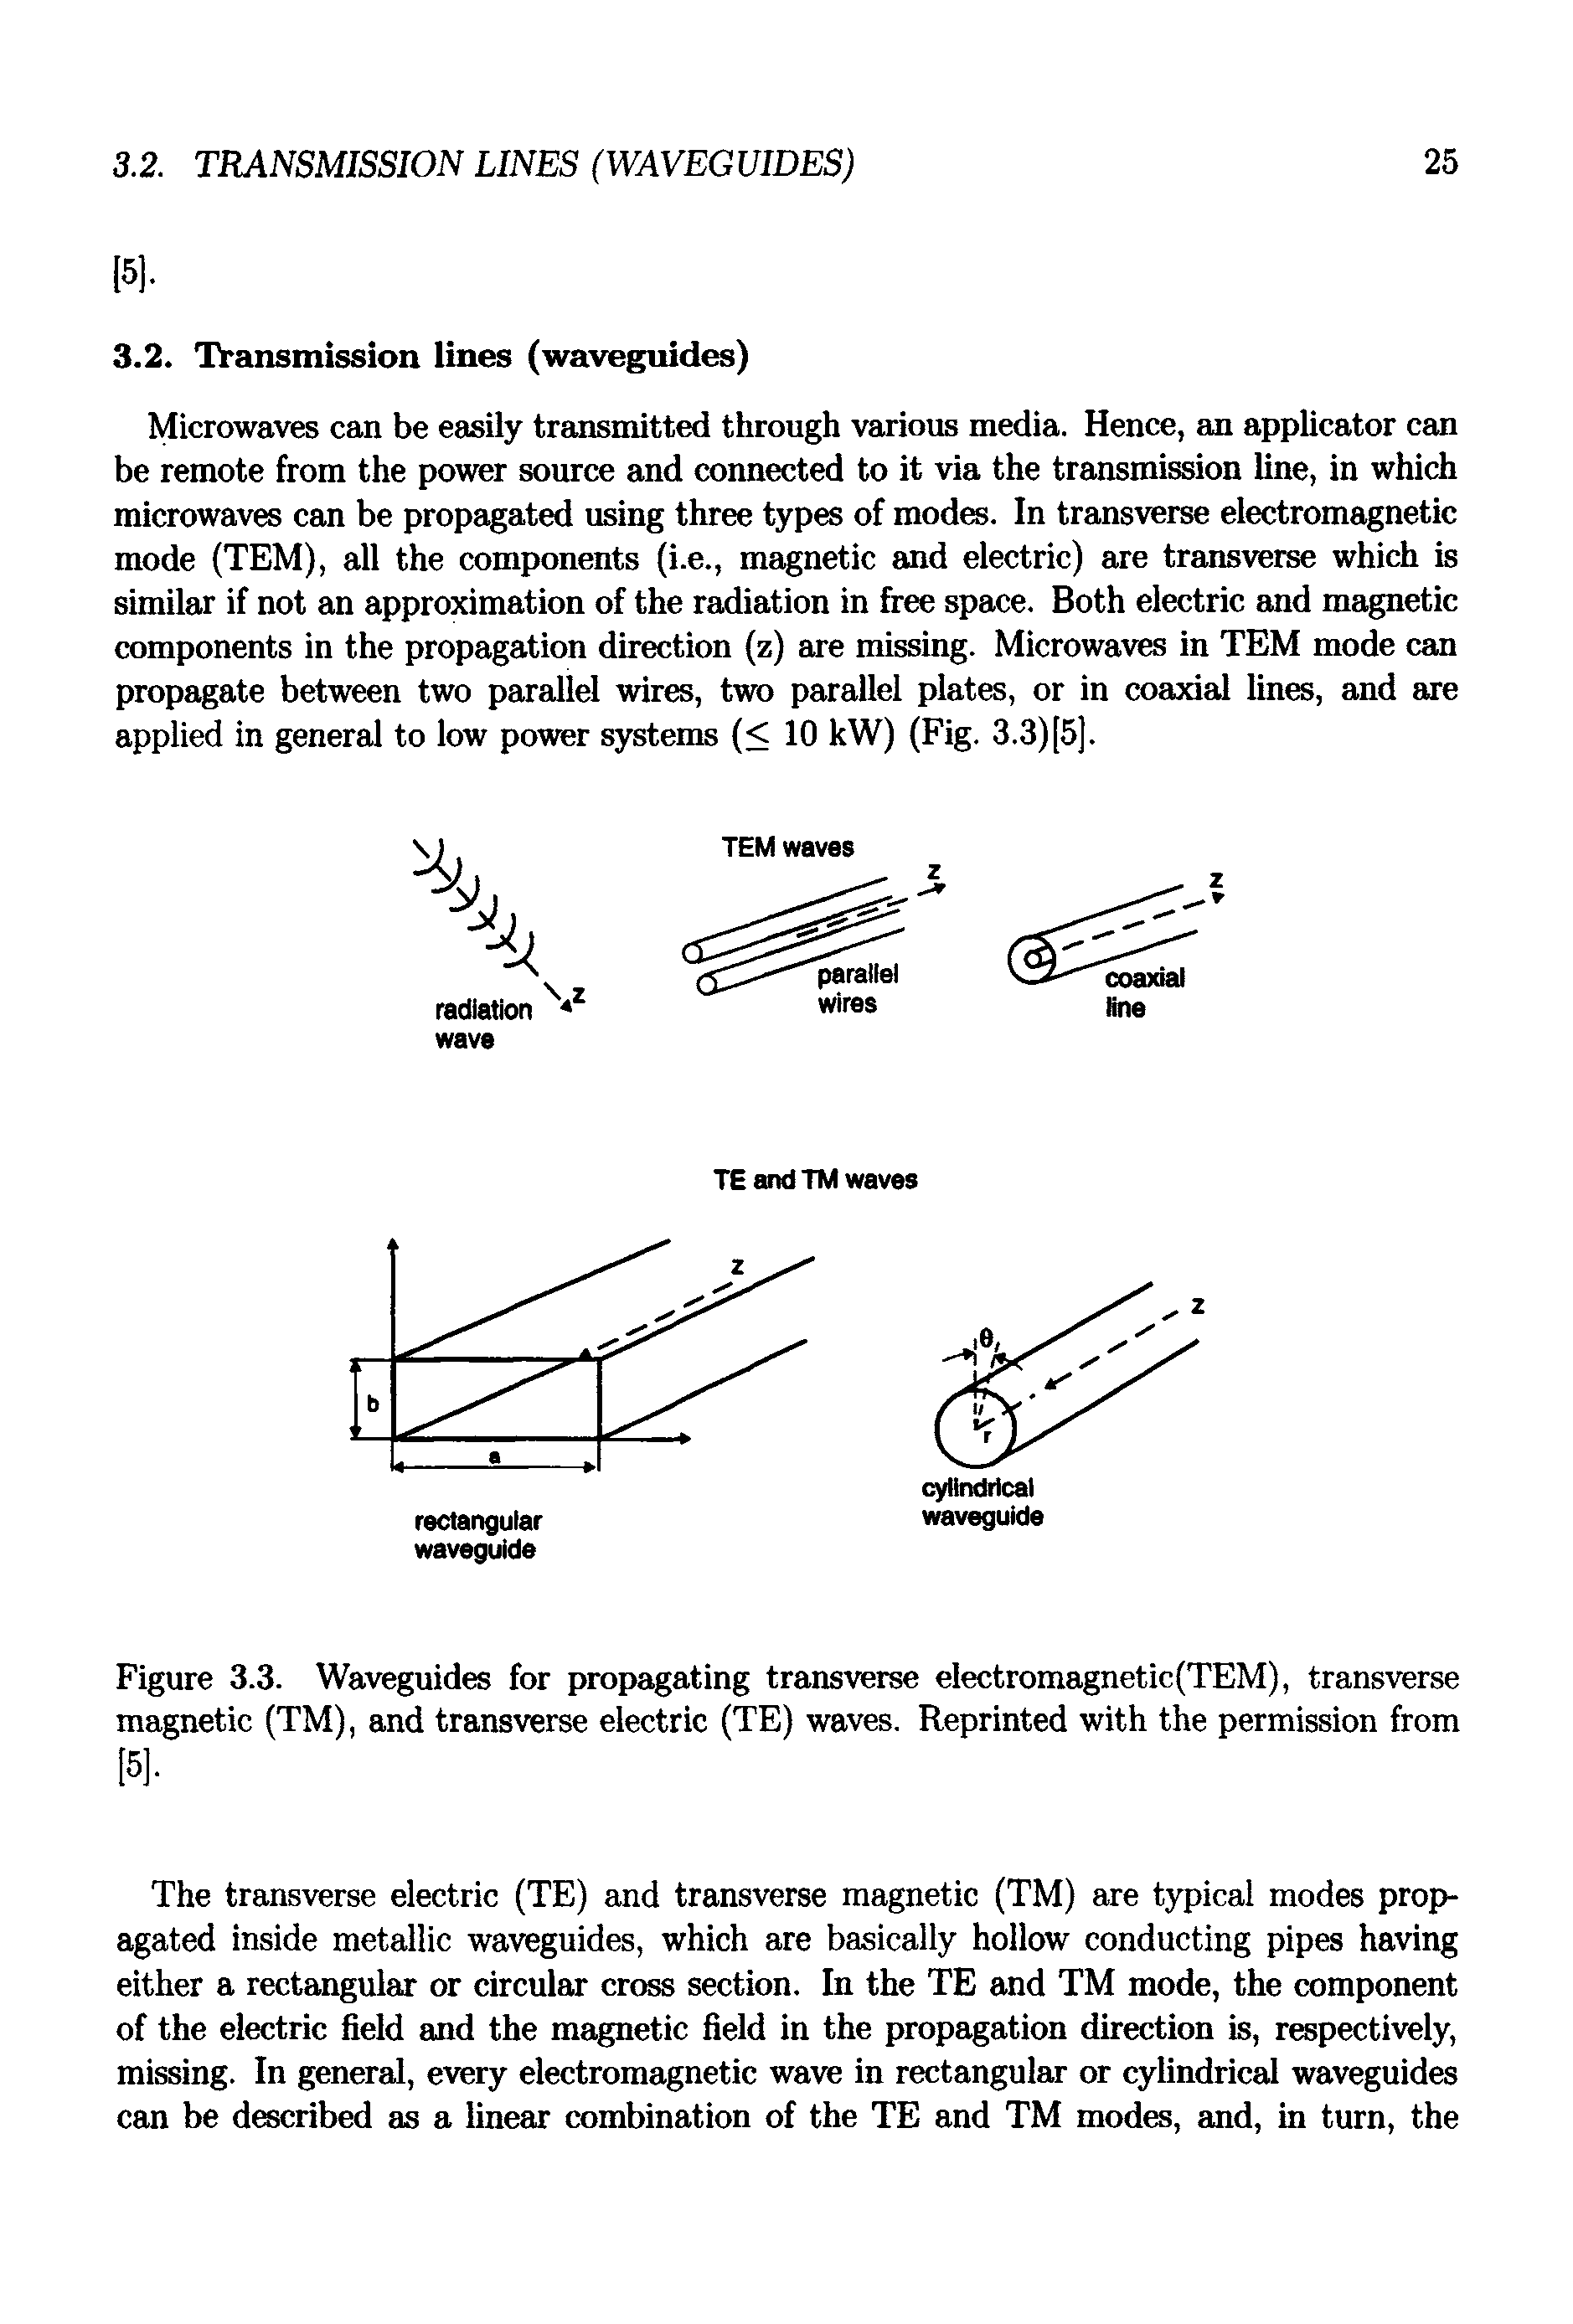 Figure 3.3. Waveguides for propagating transverse electromagnetic(TEM), transverse magnetic (TM), and transverse electric (TE) waves. Reprinted with the permission from [5],...